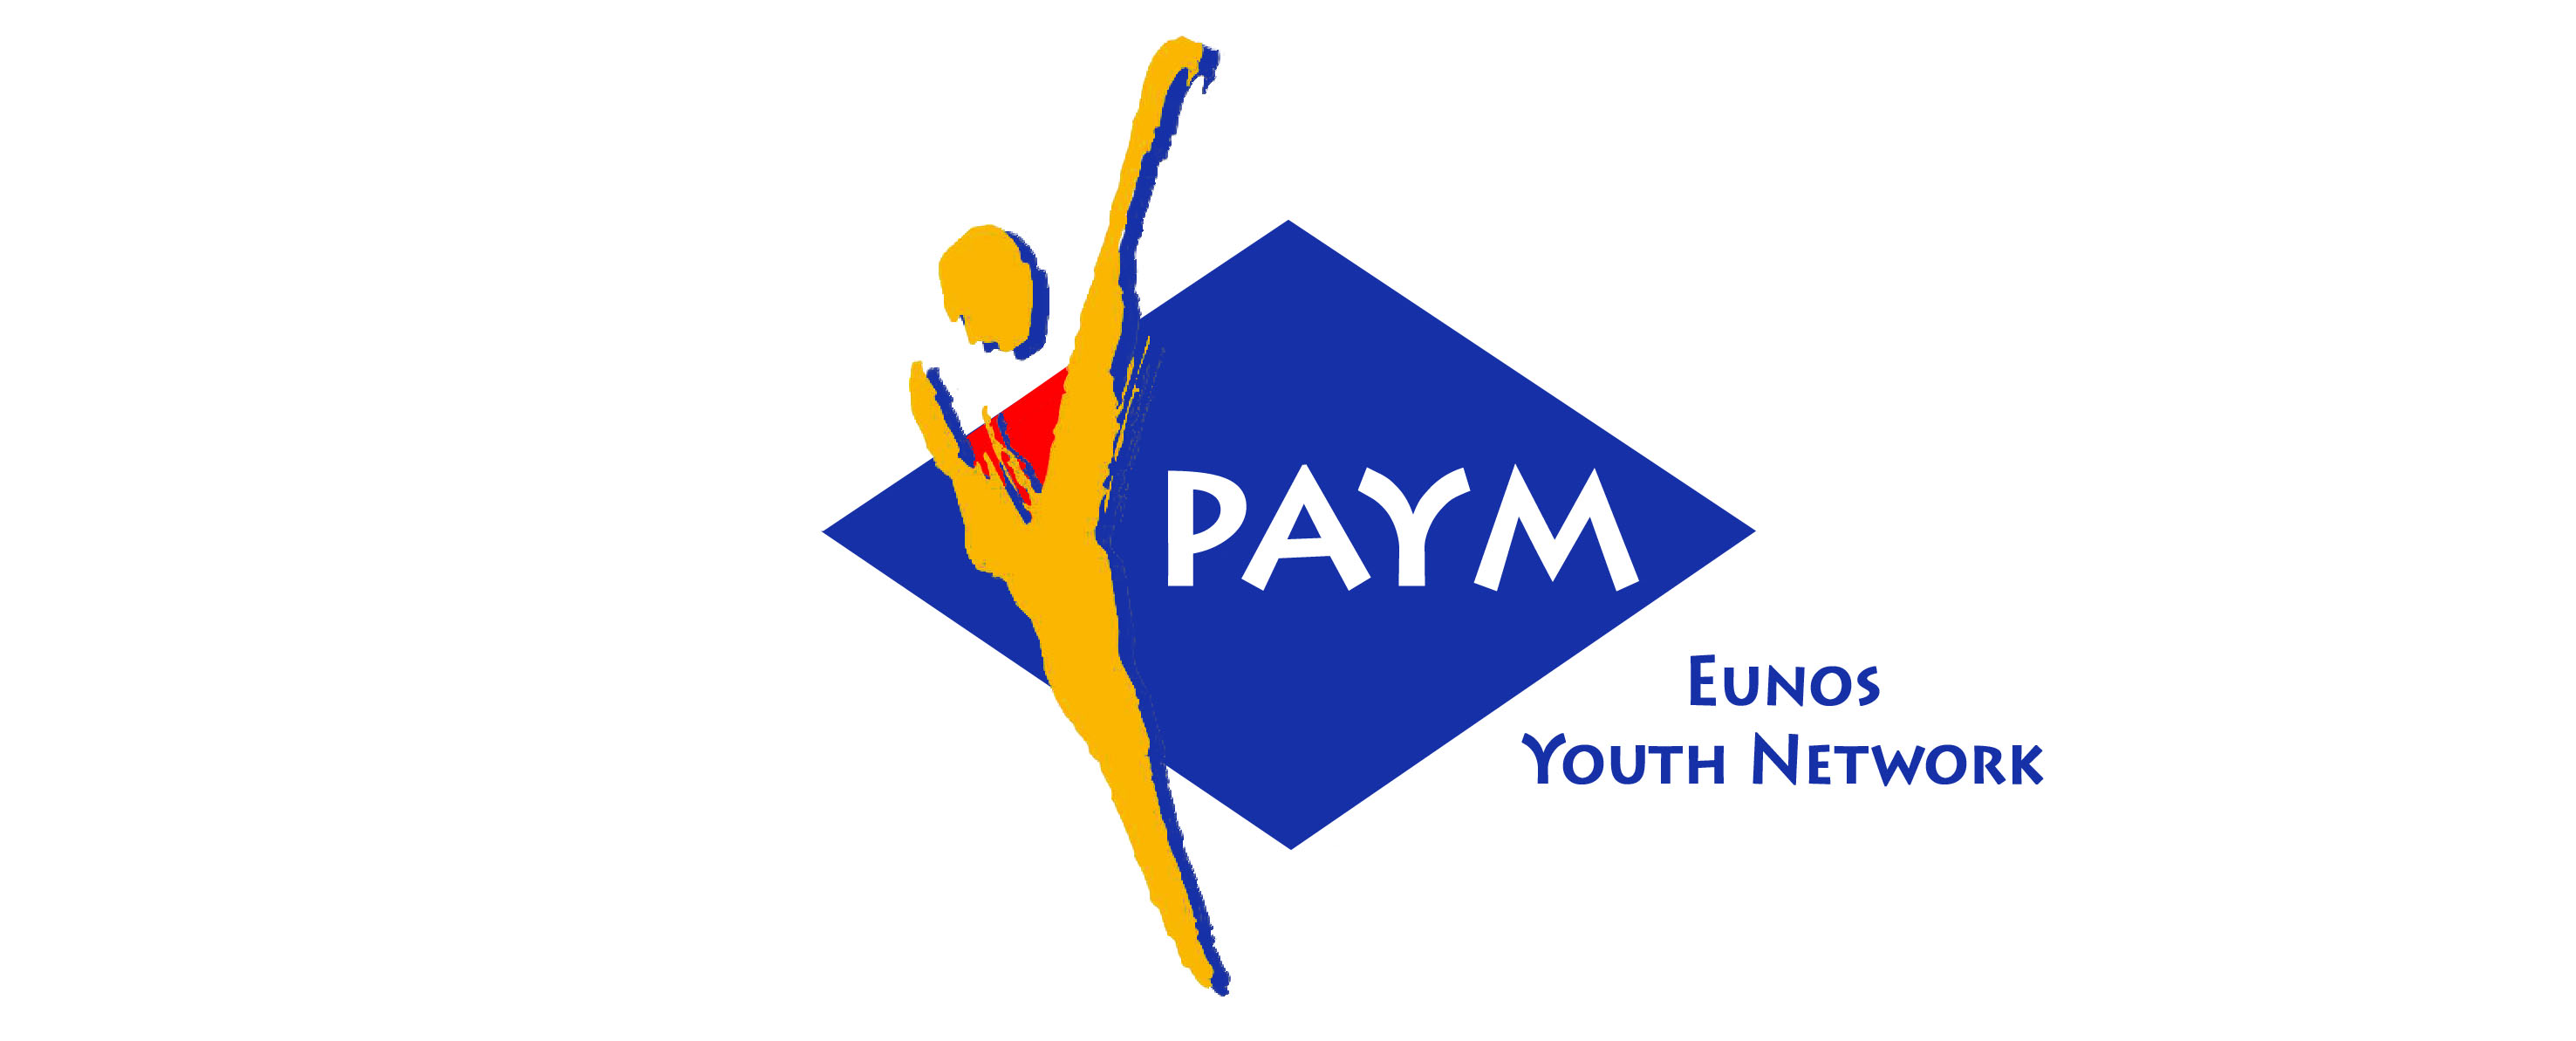 PAYM Eunos Youth Network